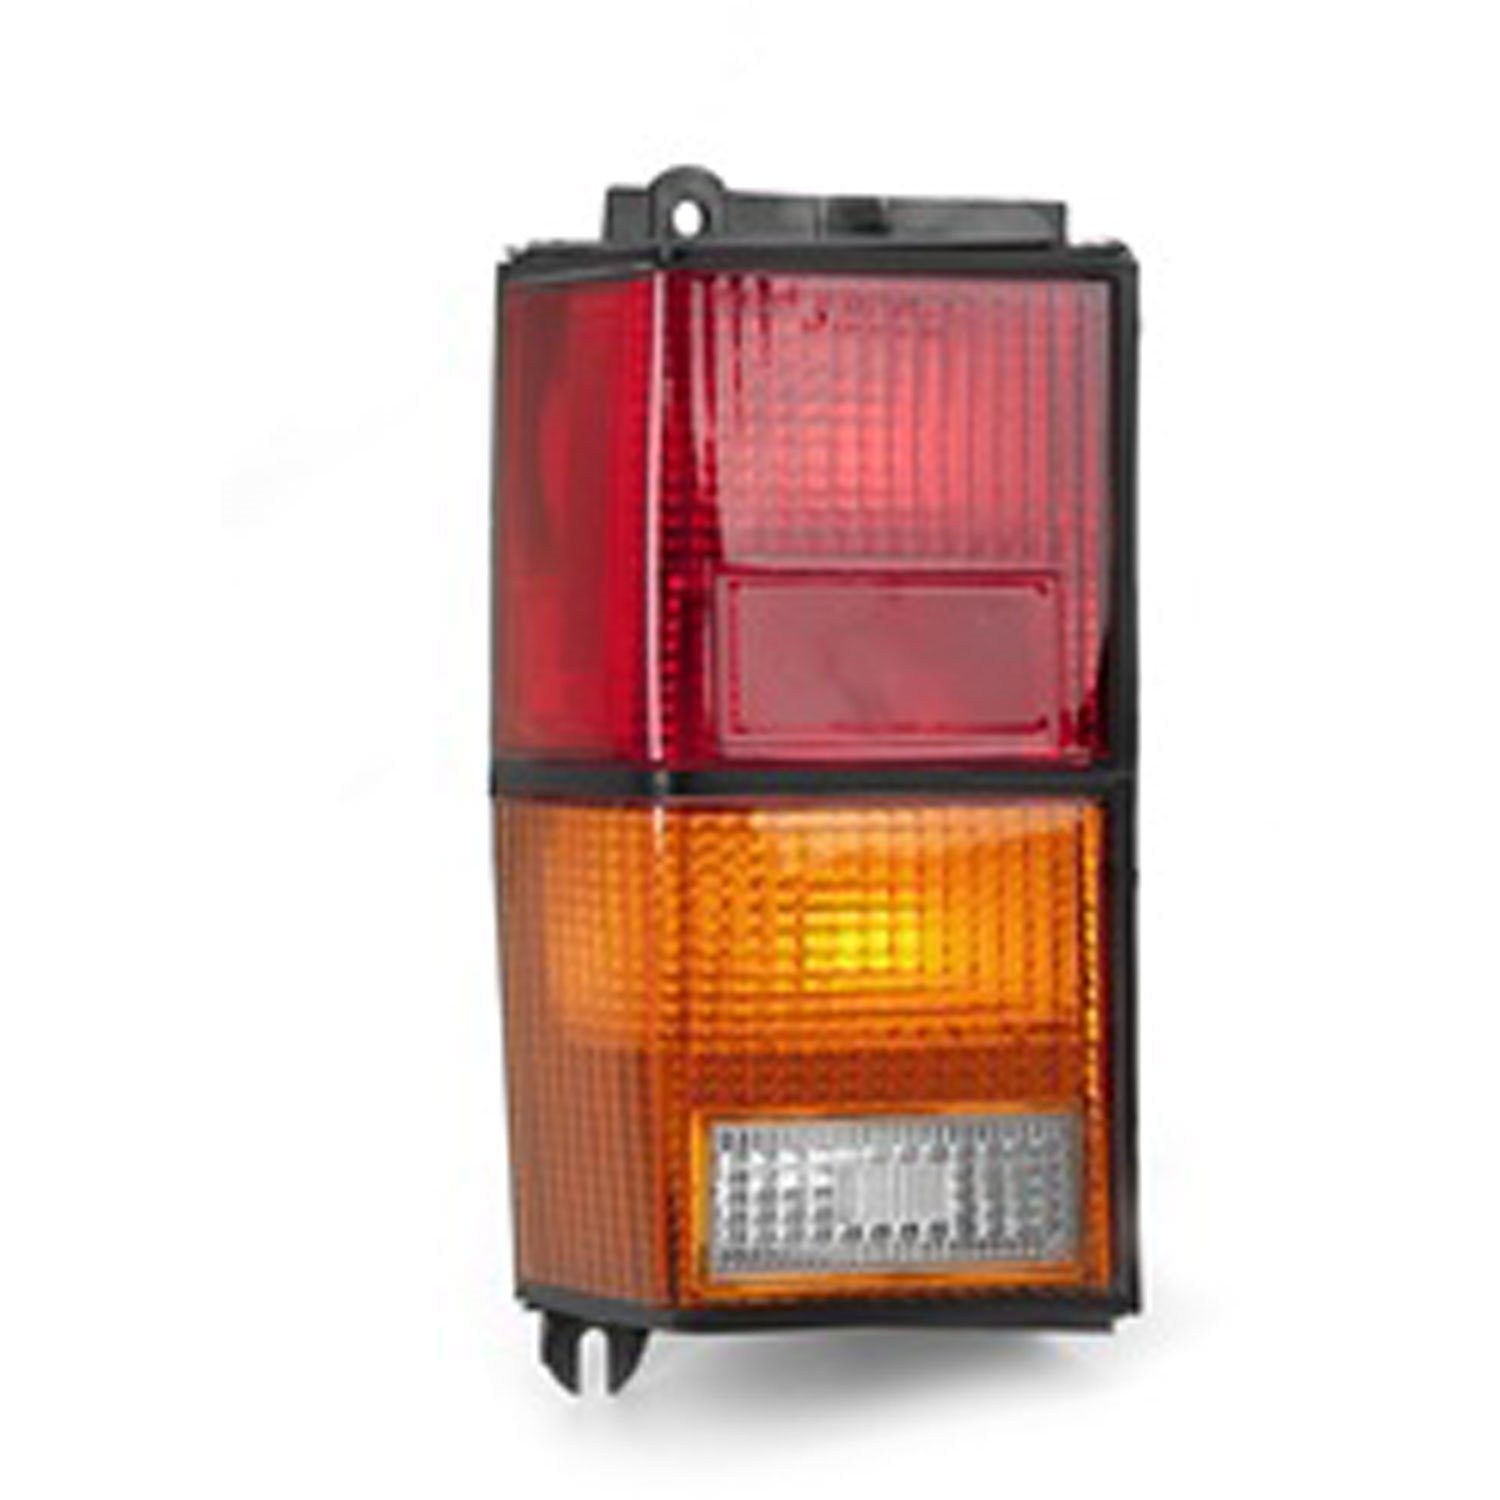 Replacement tail light assembly from Omix-ADA, Fits left side of 84-96 Jeep Cherokee XJ